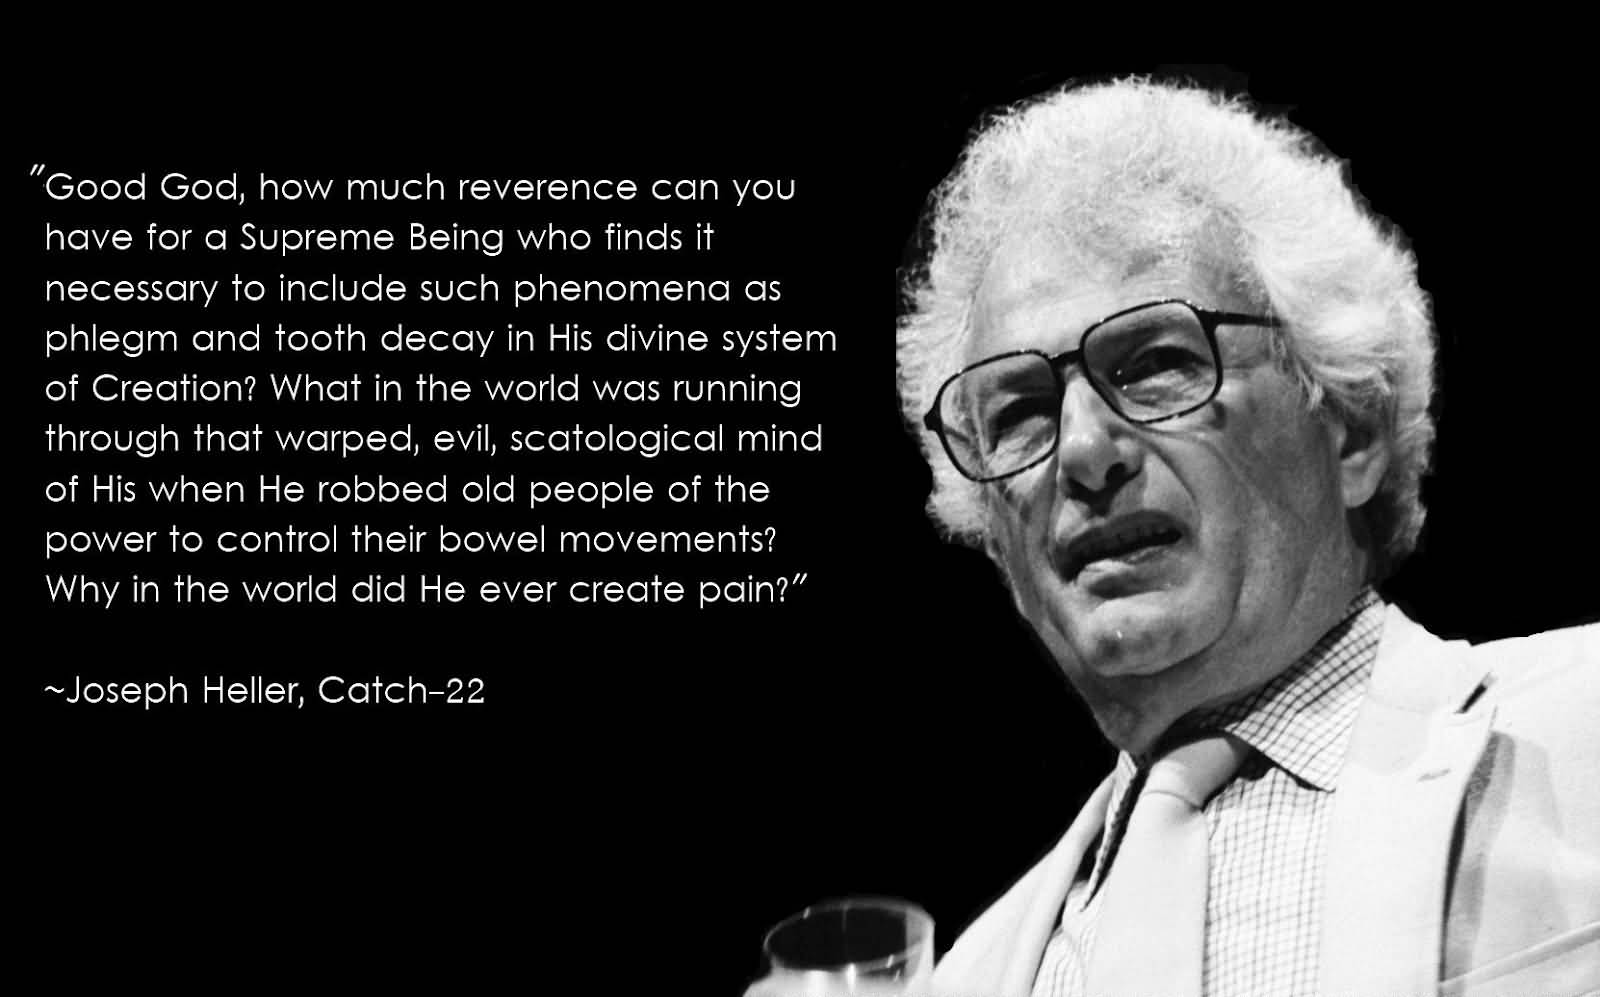 Good God, how much reverence can you have for a Supreme Being who finds it necessary to include such phenomena as phlegm and tooth decay in His divine ... Joseph Heller